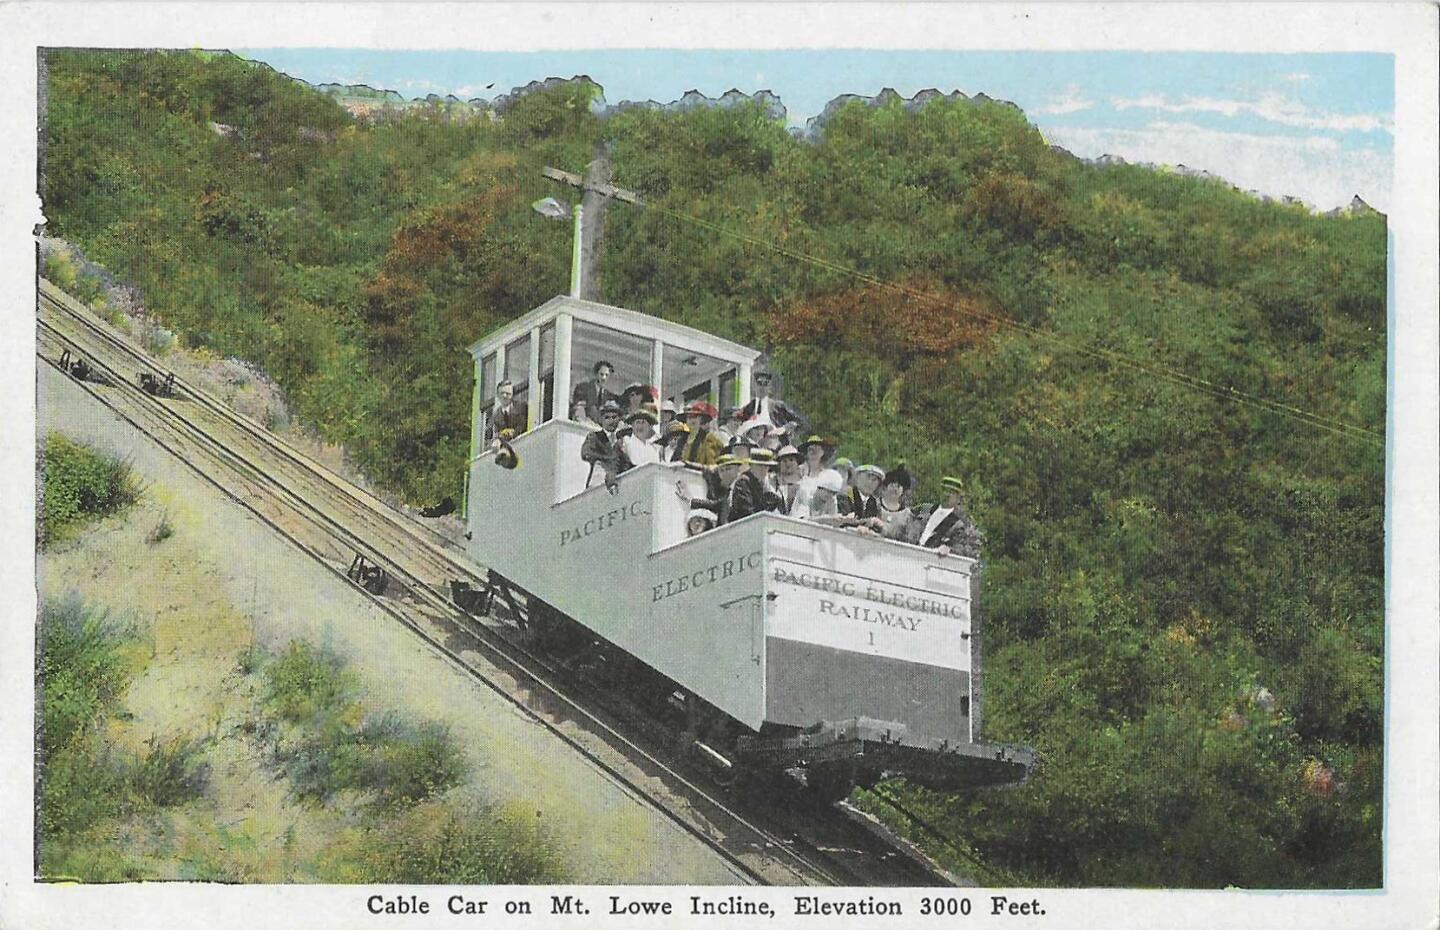 mt-lowe-cable-car-front.jpeg